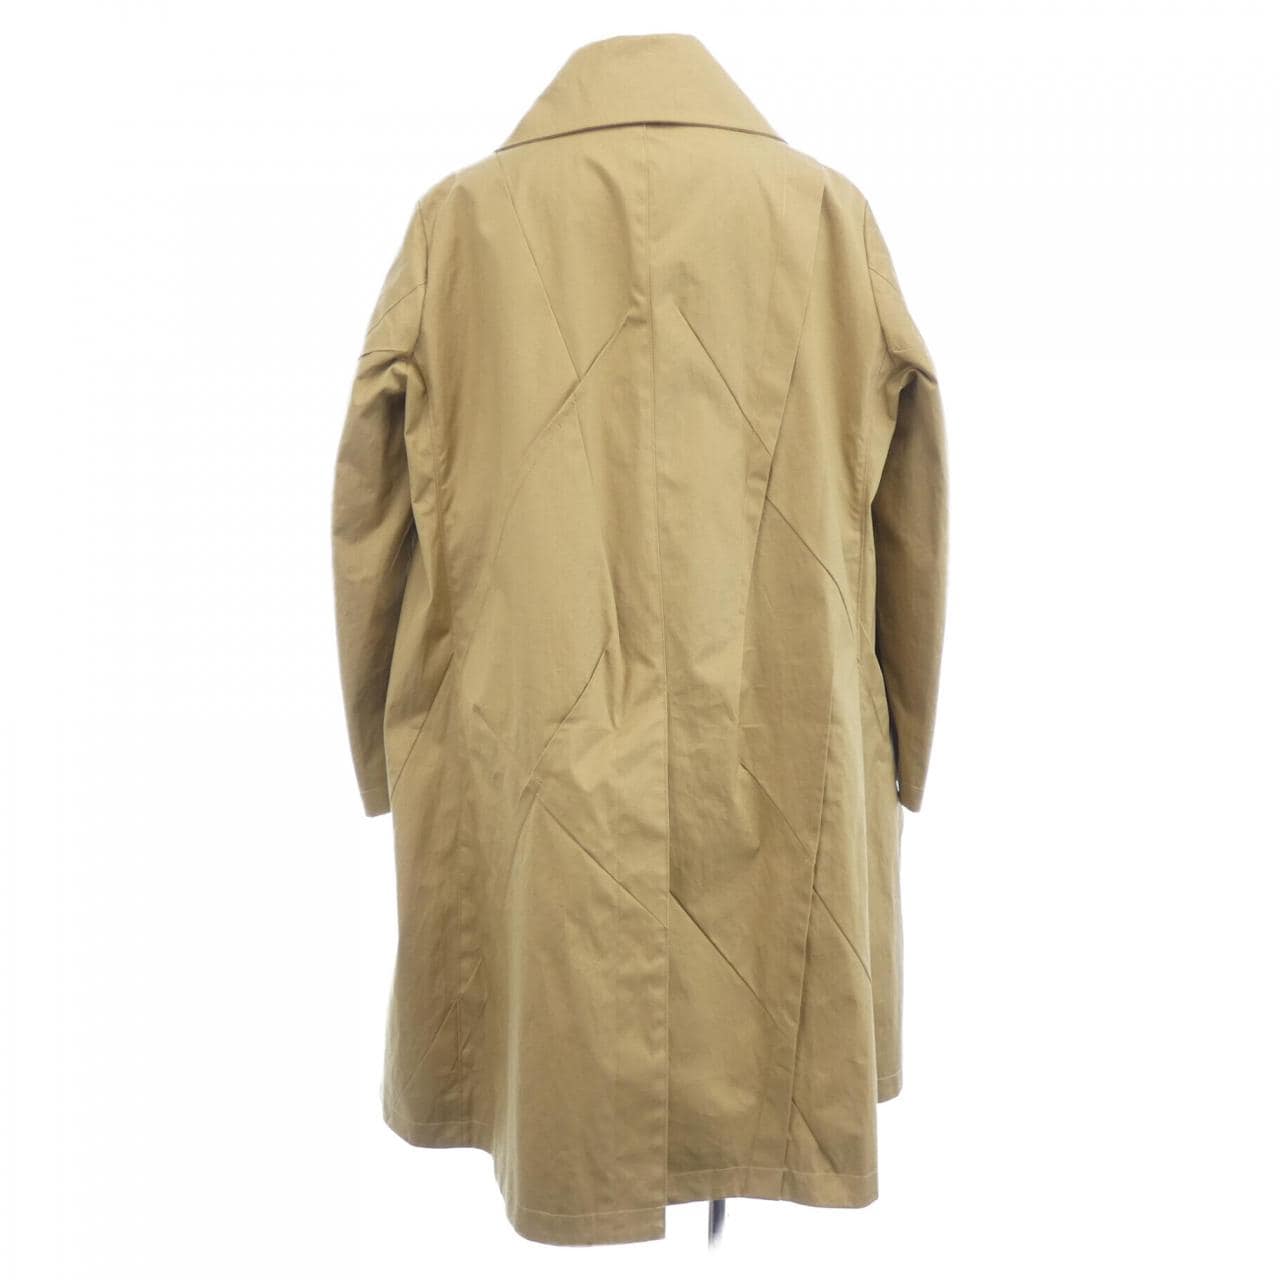 UNDER COVER trench coat